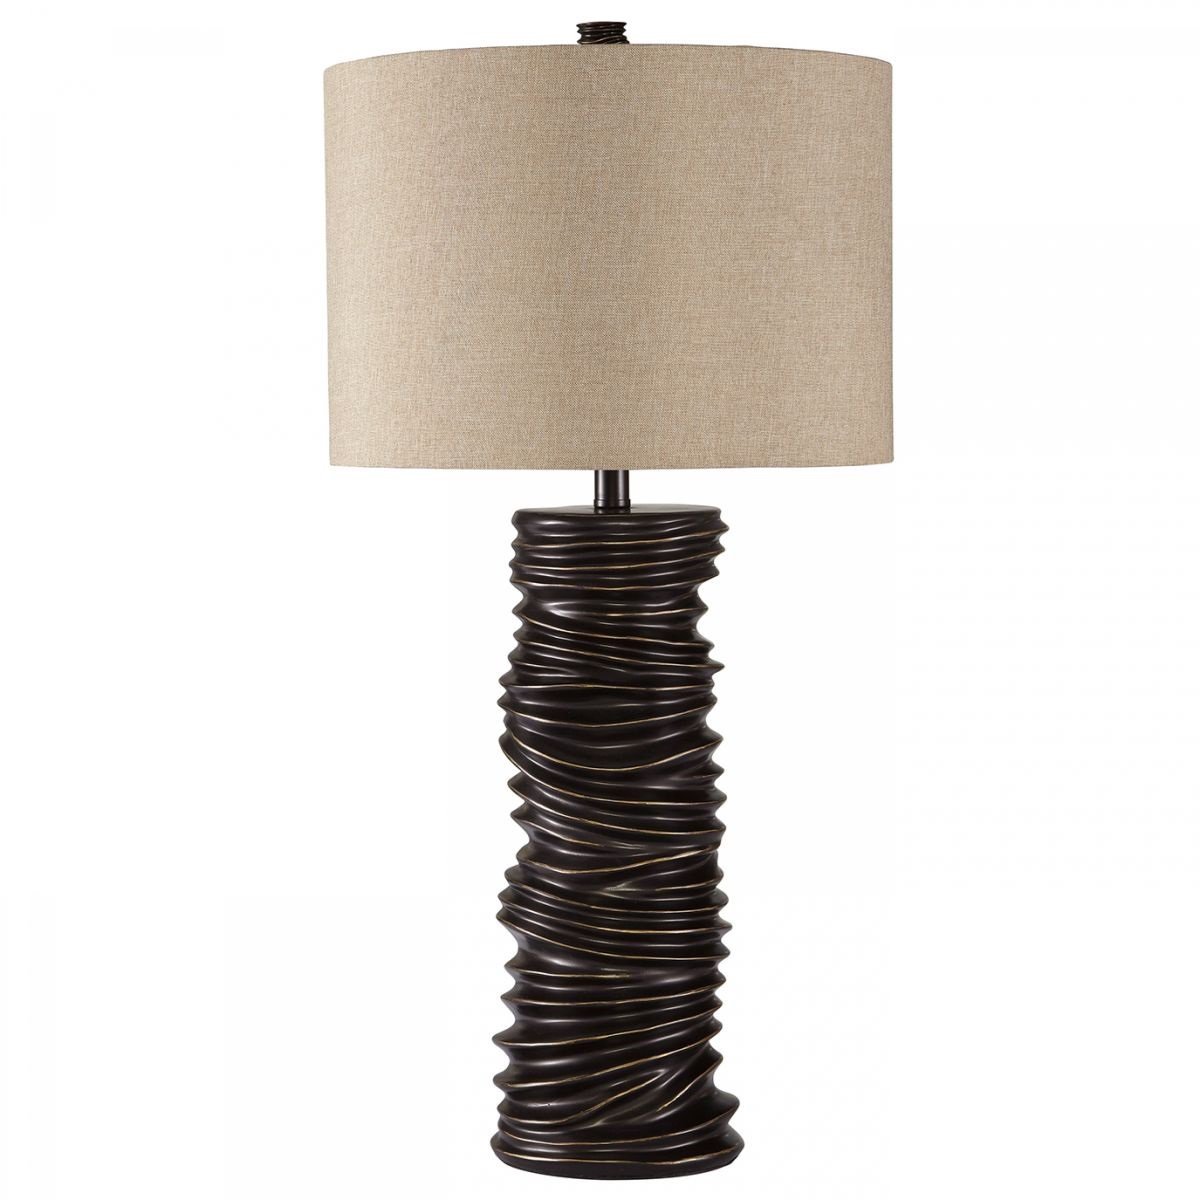 turbotic brown gold accent table lamp badcock more browngold lamps ture jute rug west elm chandelier high couch tables target battery wall clocks white drop leaf and chairs wood